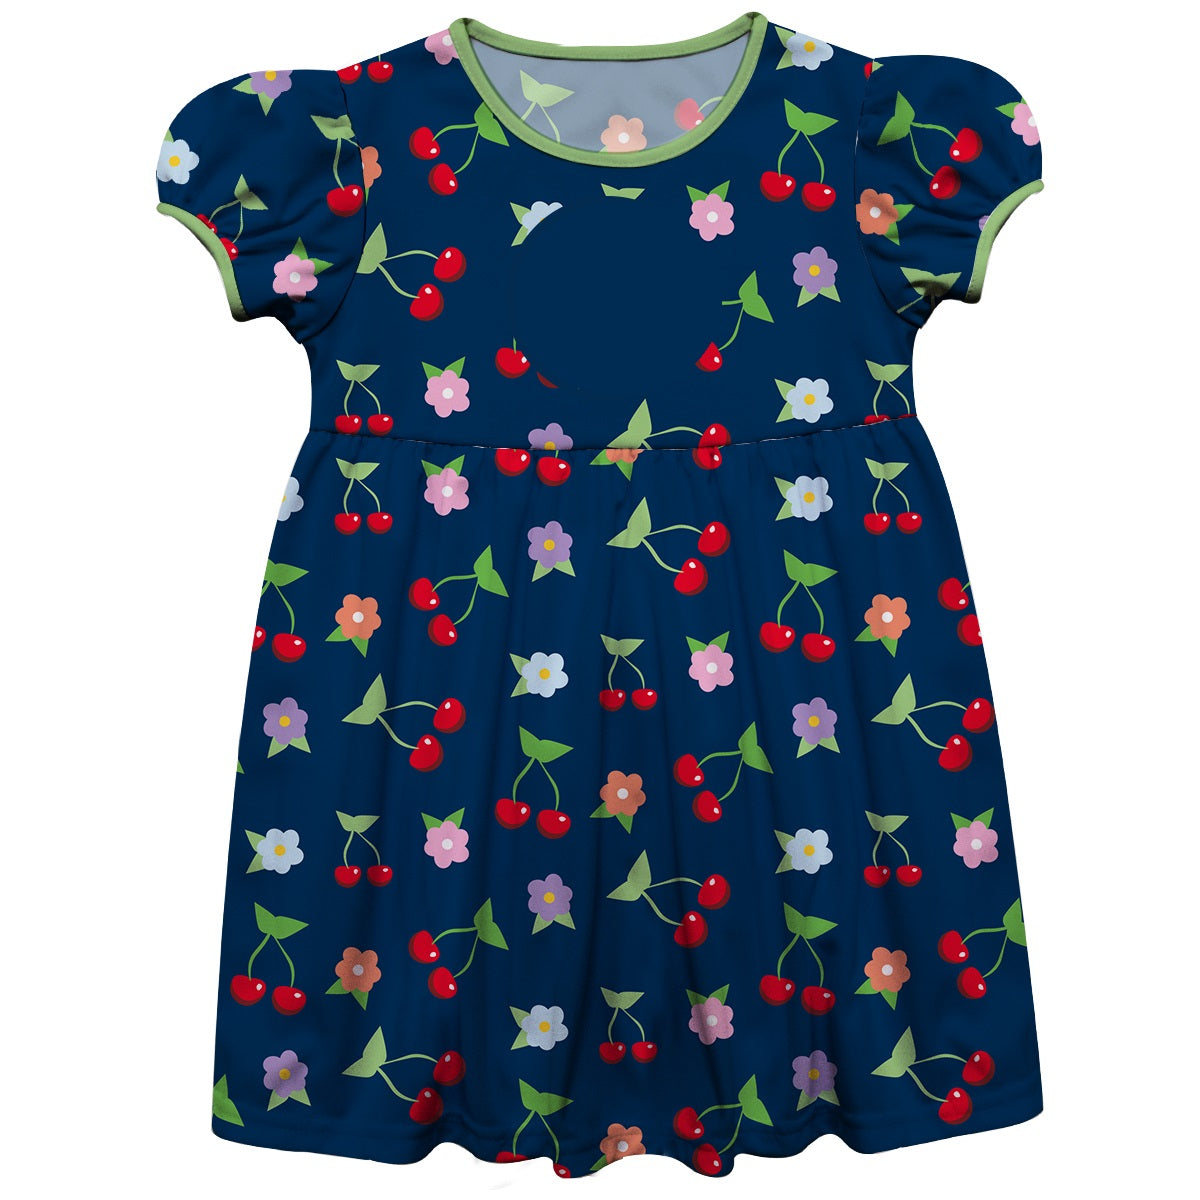 Cherries and Flowers Print Personalized Monogram Navy Short Sleeve Epic Dress - Wimziy&Co.